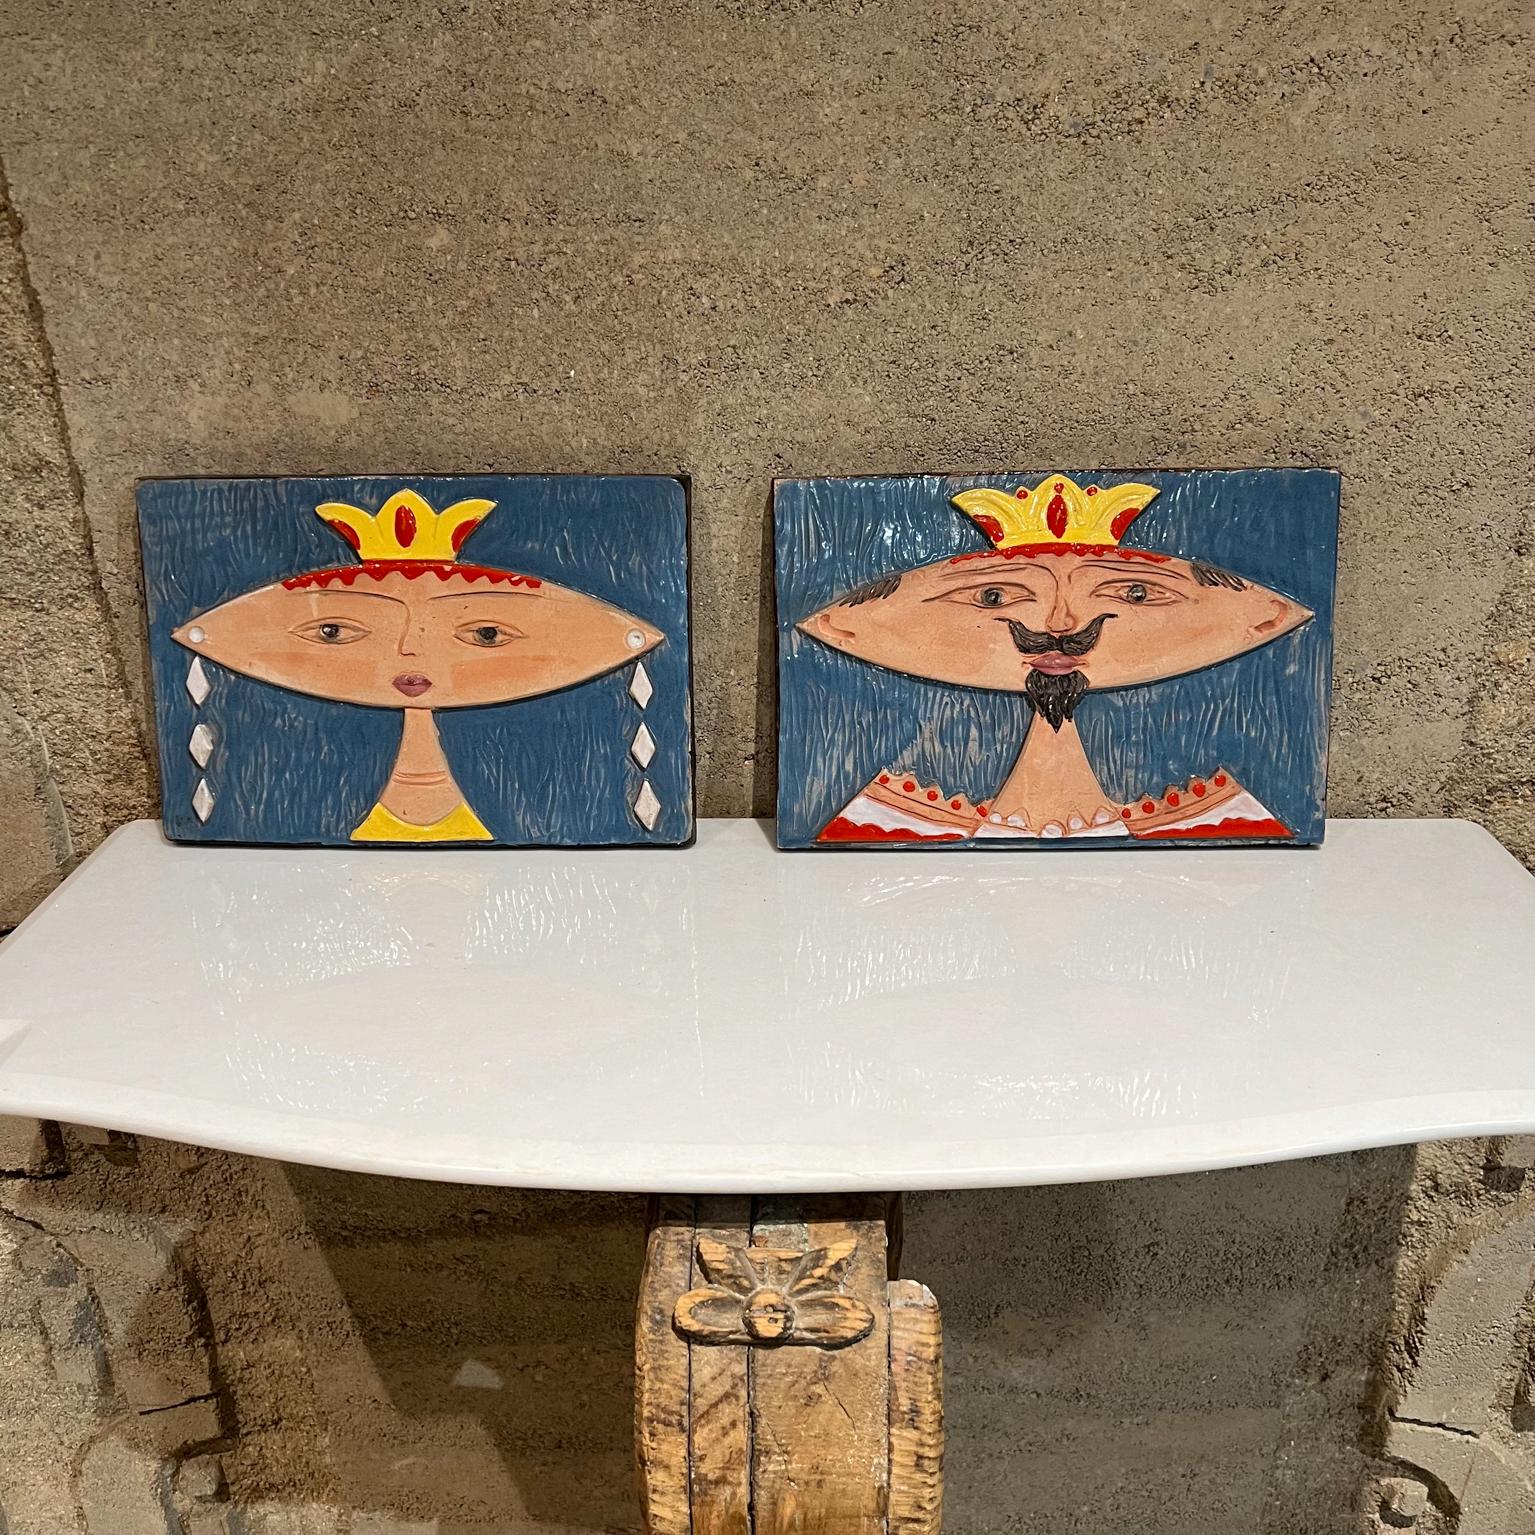 Italian Ceramic tile set of 2 His and Her hand painted 
1970s Regal His and Her Italian Wall Tiles Style of Giovanni De Simone ITALY
11.5 w x 8.25 tall x .5 thick
Stamped 17/105 A and B Italy
Original vintage condition preowned.
See images